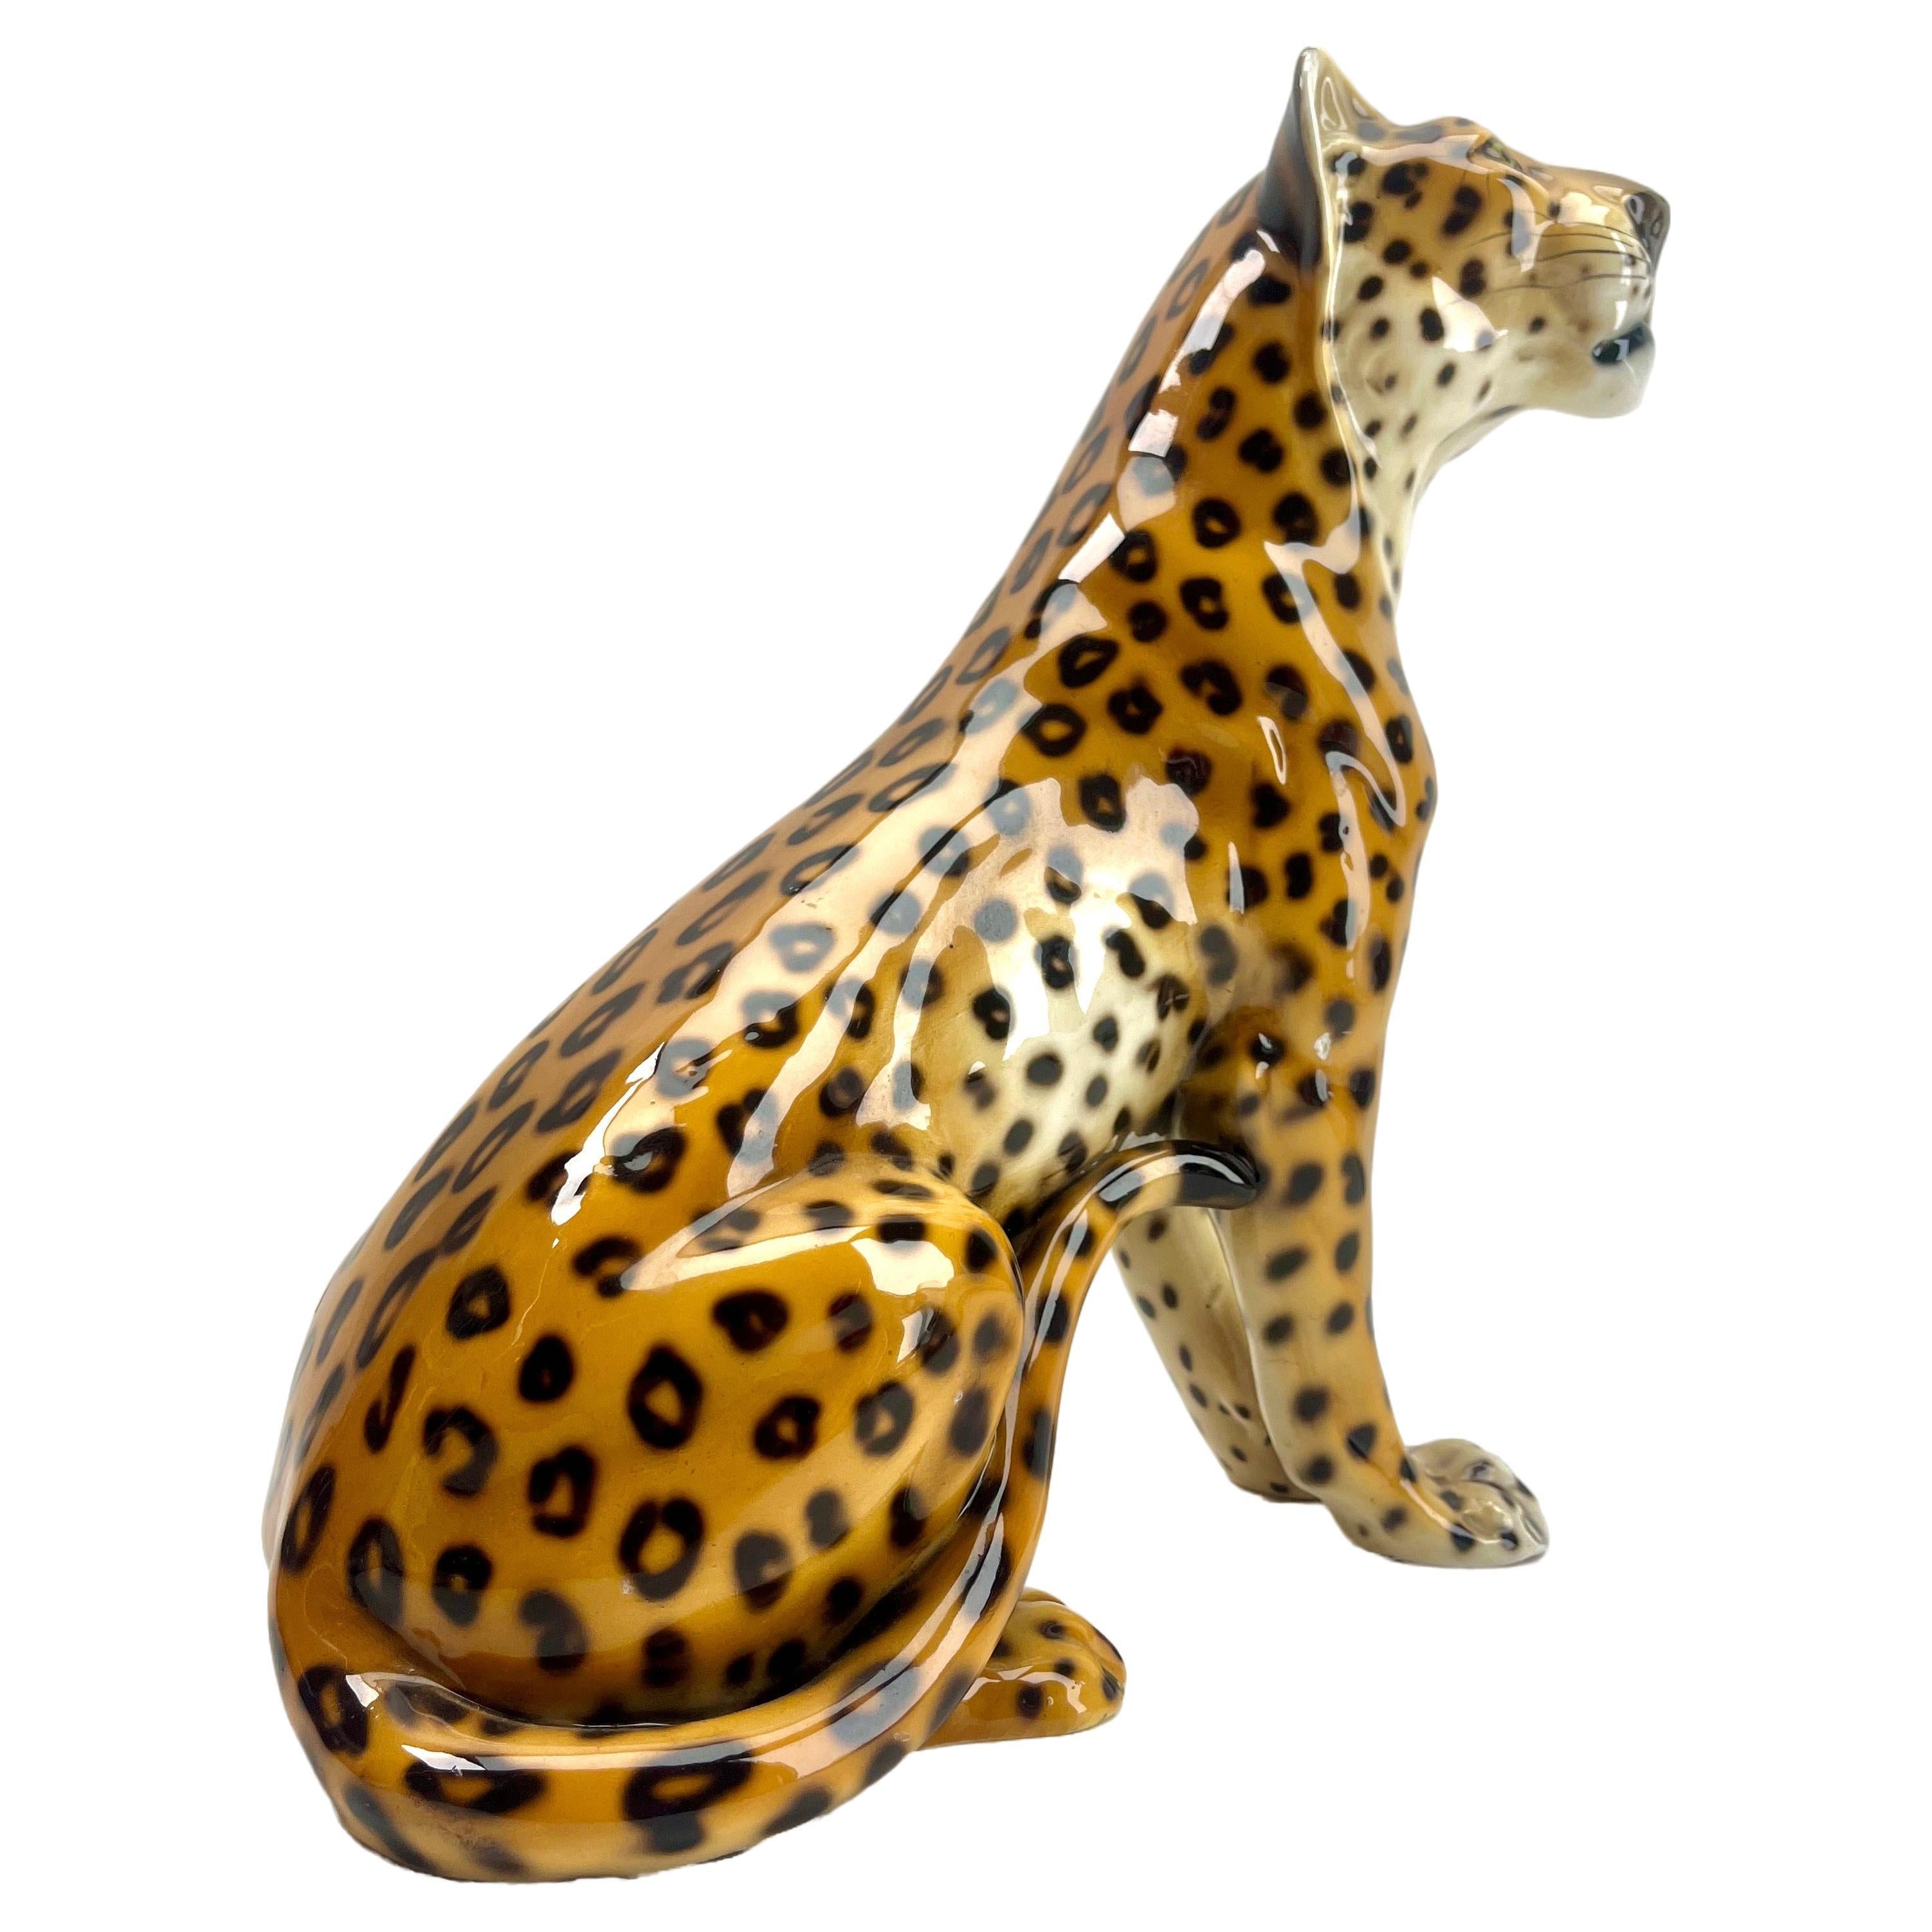 Stylish Ceramic Glazed Handpainted leopard Sculpture Ronzan Signed, Italy, 1950s For Sale